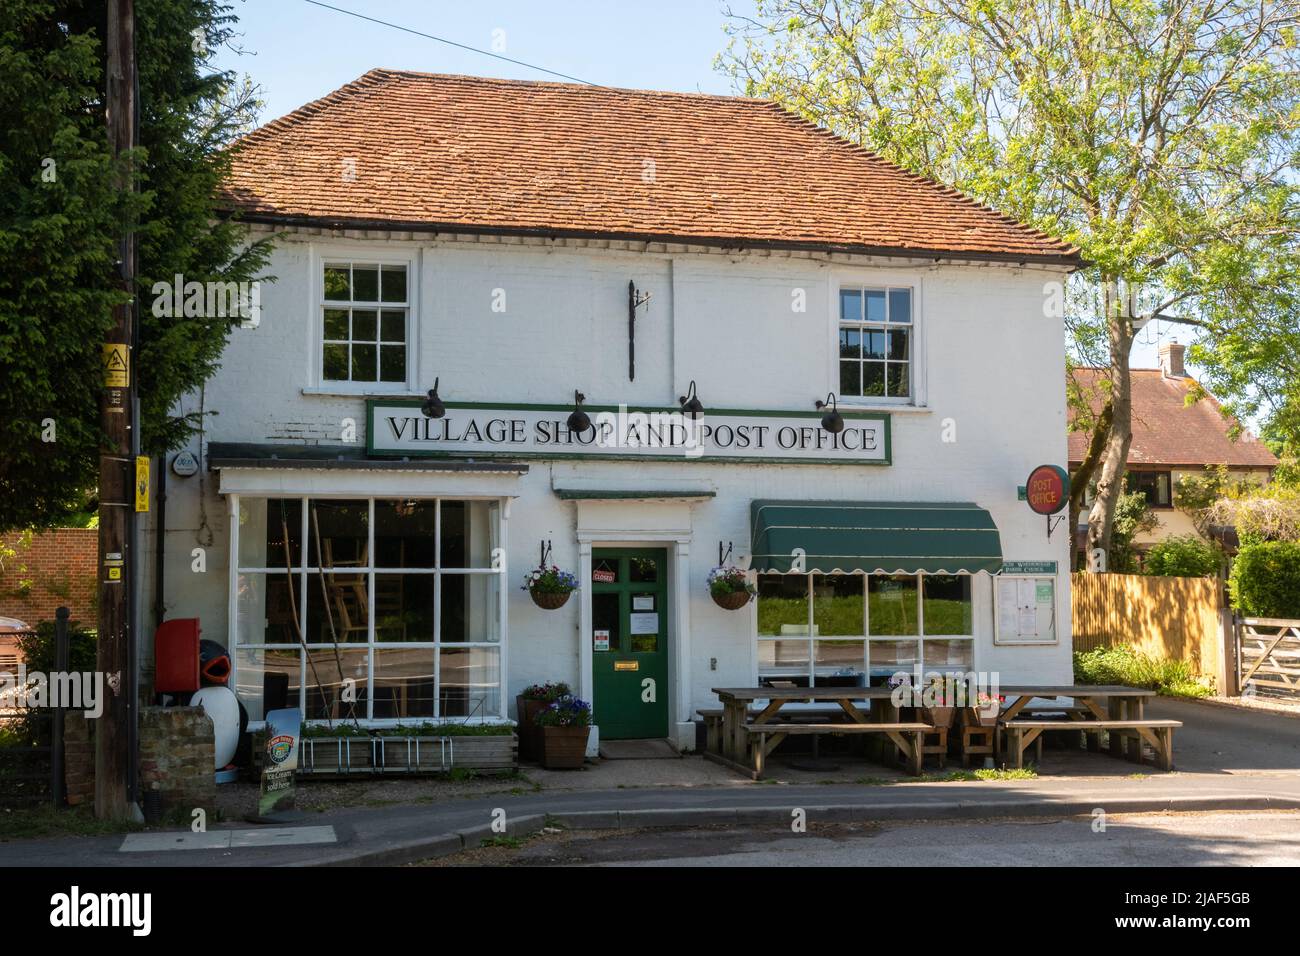 Village Shop and Post Office in South Warnborough, Hampshire, England, UK, associated with the post office scandal. Jo Hamilton accused falsely Stock Photo